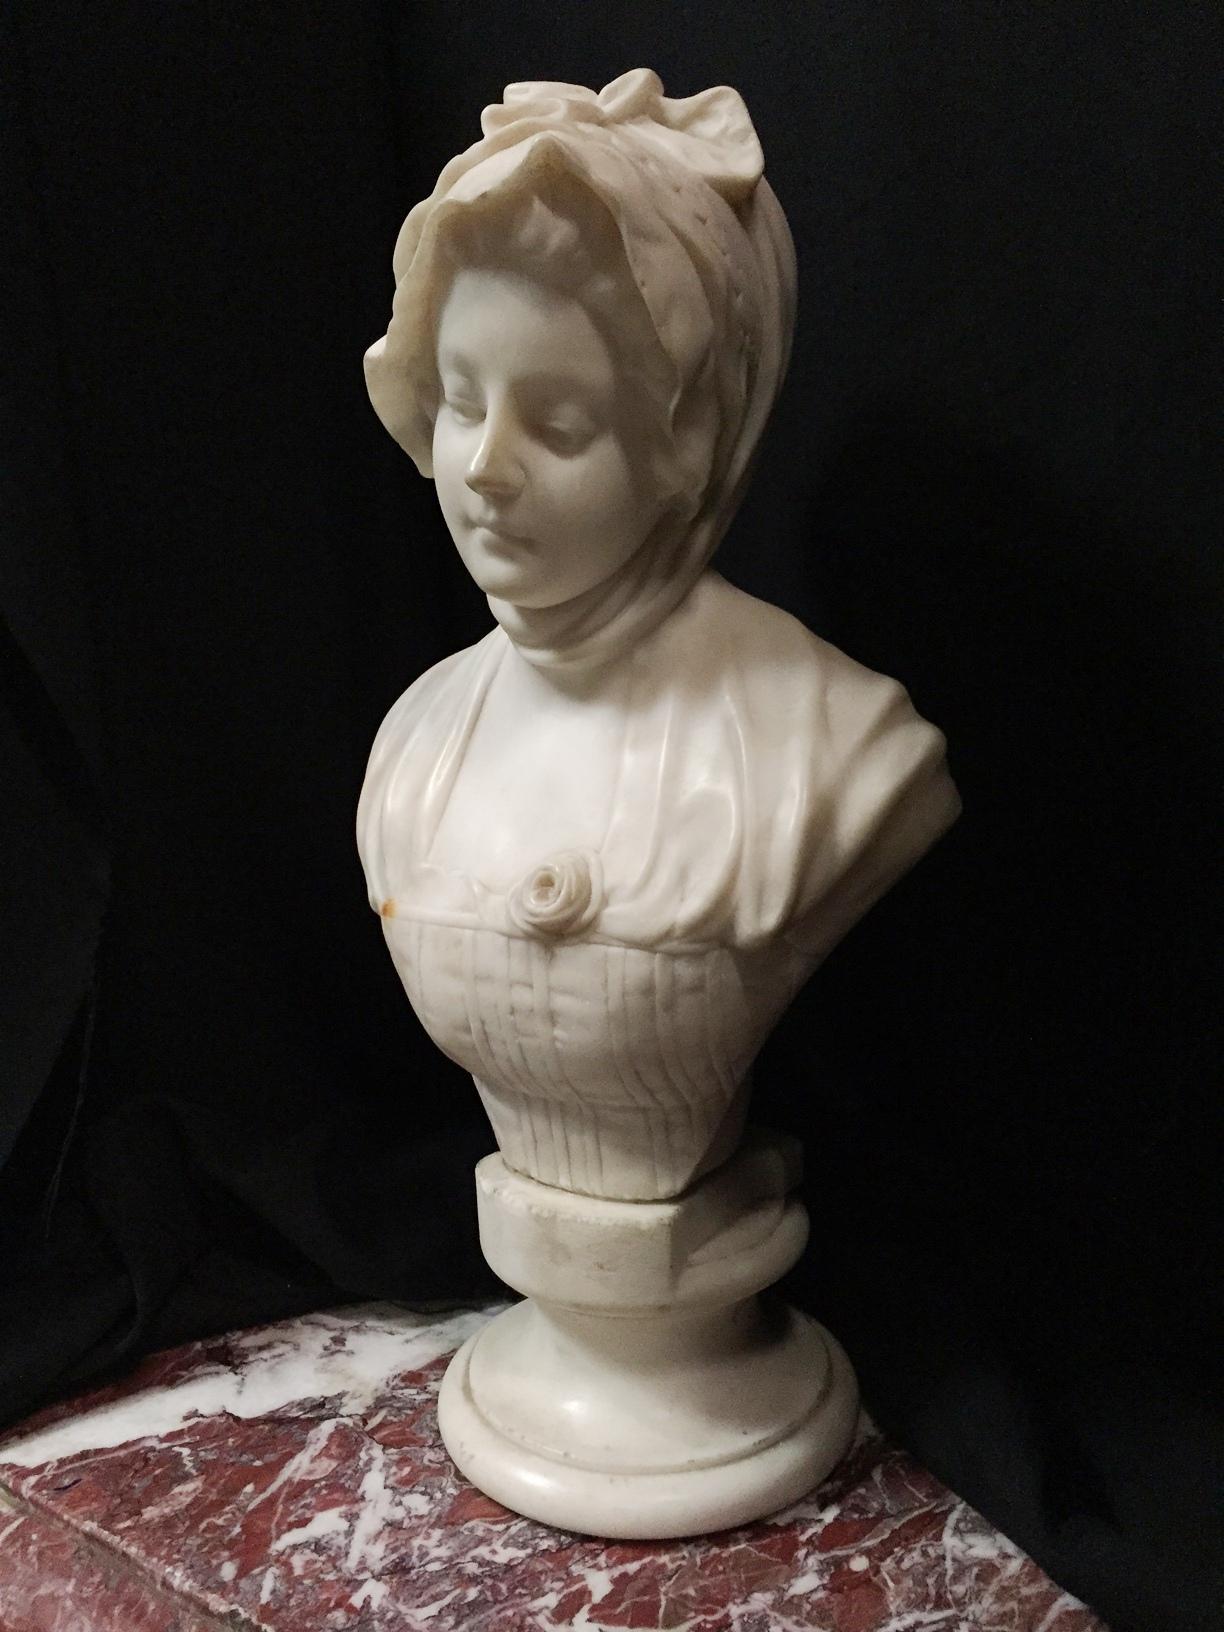 19th century Italian carved marble bust of a maiden in classical robes and headdress. Meticulous attention is given to the details of the bust and especially on the facial features.

Measures: Diameter of base: D. 7